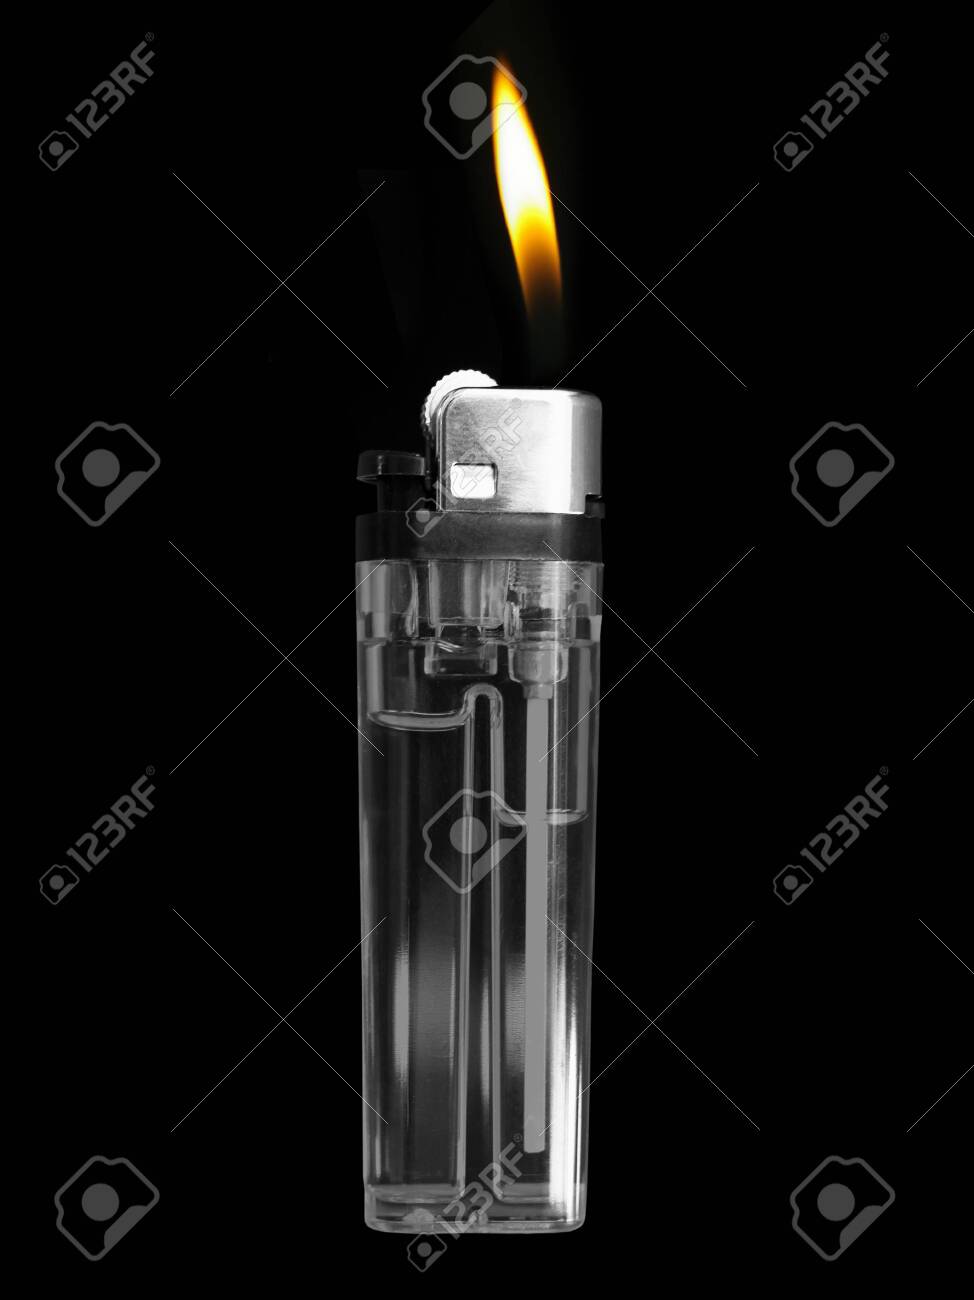 Plastic Gas Lighter In Black Background Stock Photo Picture And